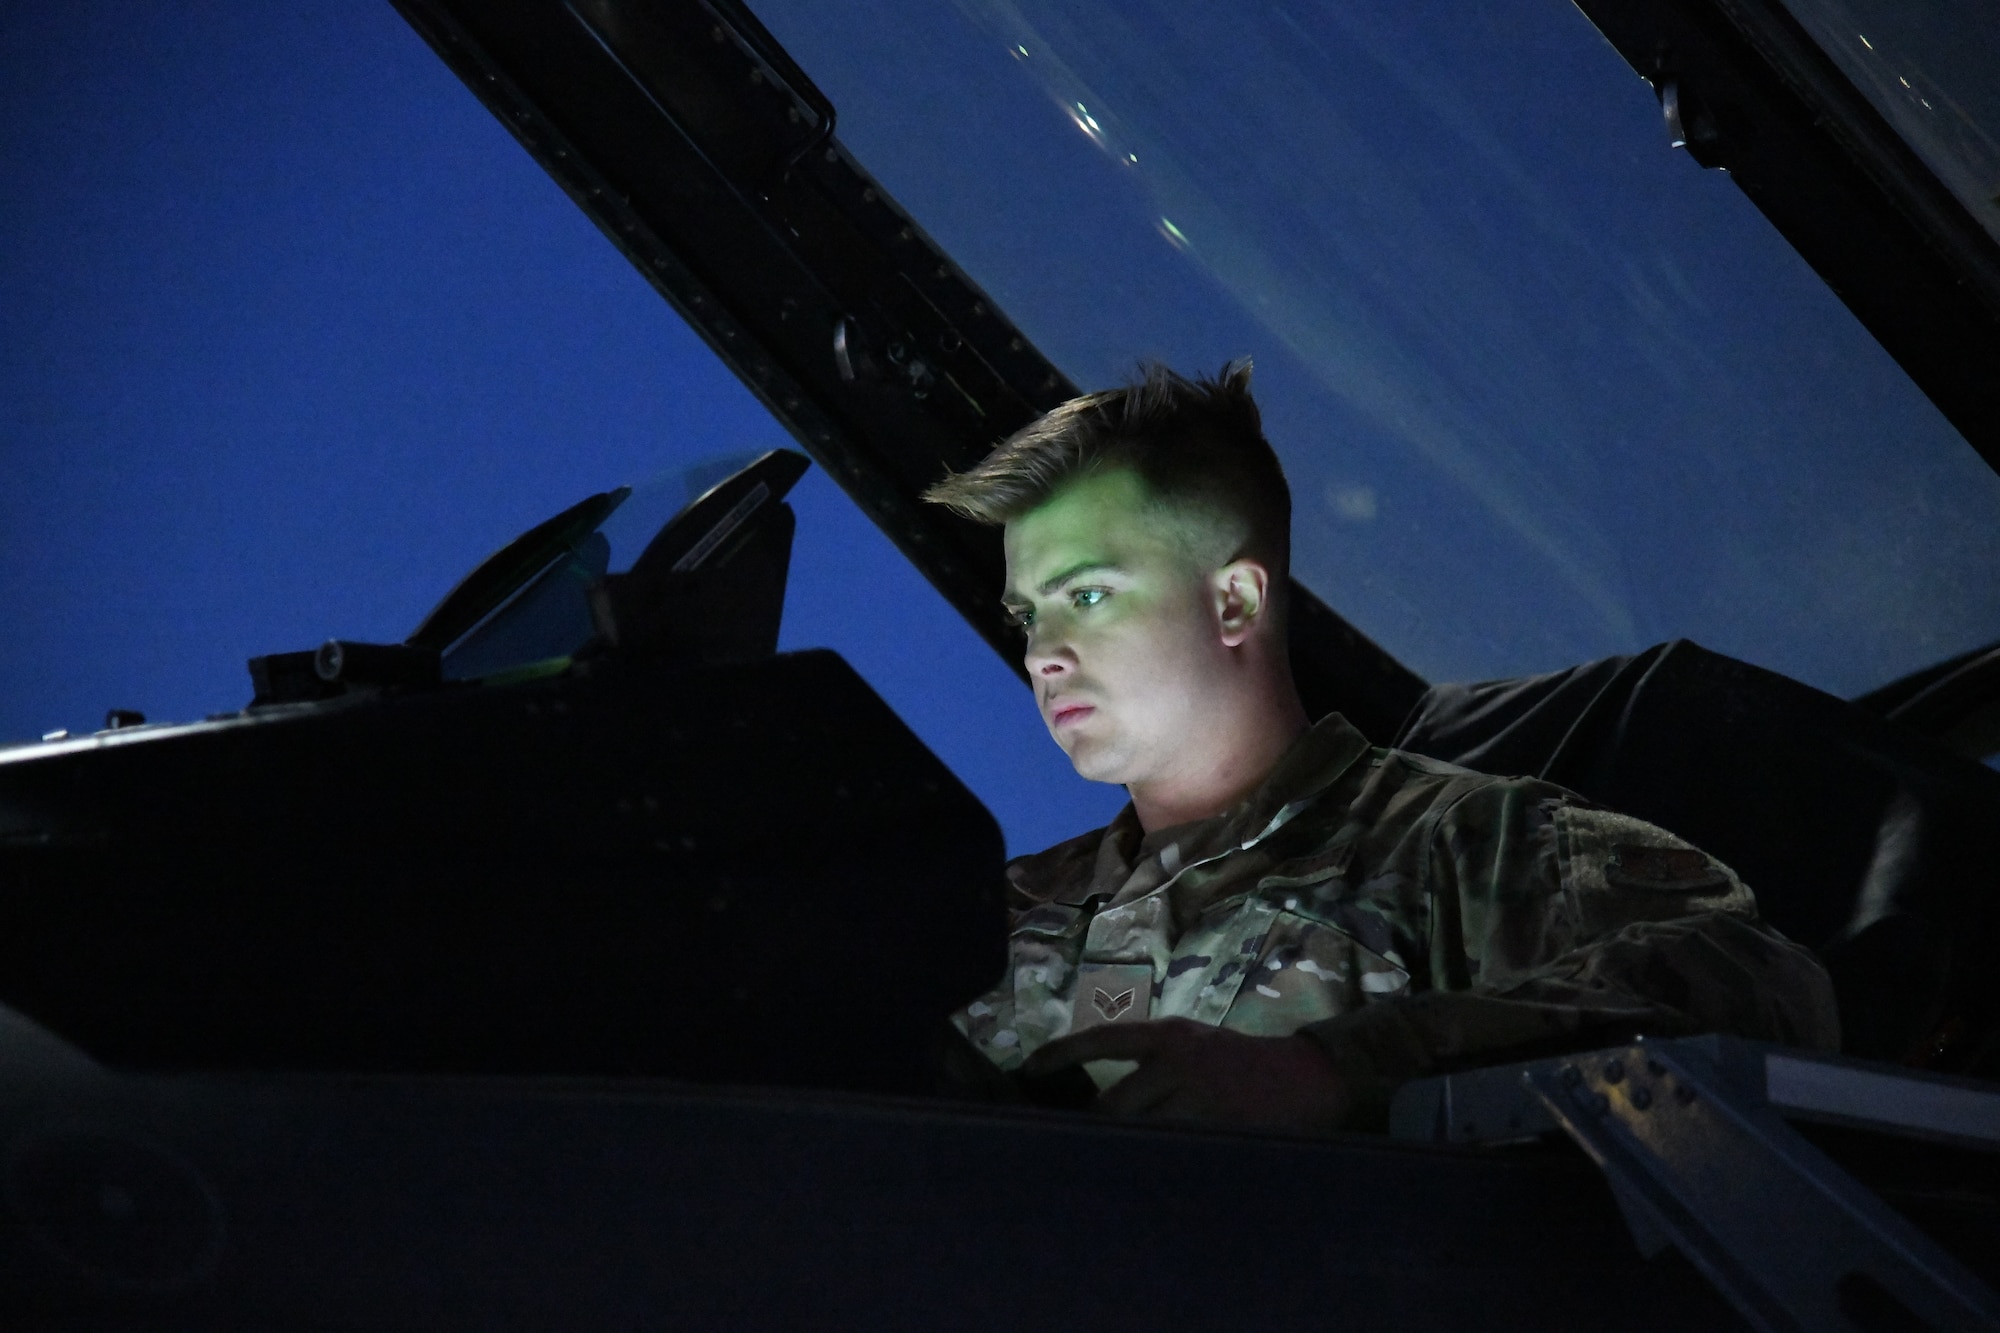 F-16 Fighter Aircraft Integrated Avionics Specialist, Staff Sgt. Isaak Blue, performs an operational check on an F-16 Fighting Falcon during a training deployment at Nellis Air Force Base, Nevada on Feb. 9, 2022.